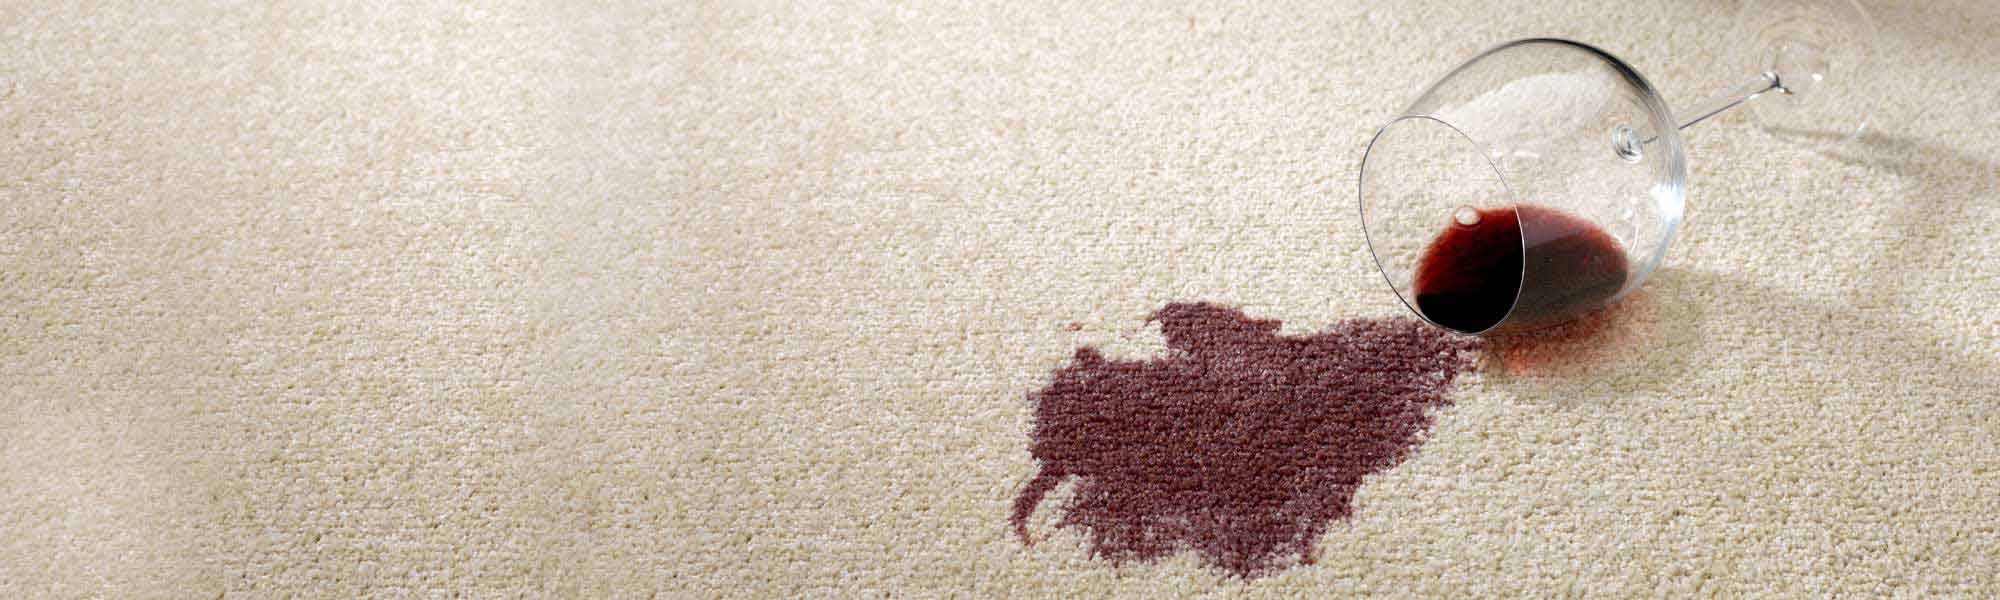 Specialty Stain Removal Service by Cowgirl Chem-Dry in Fort Worth TX